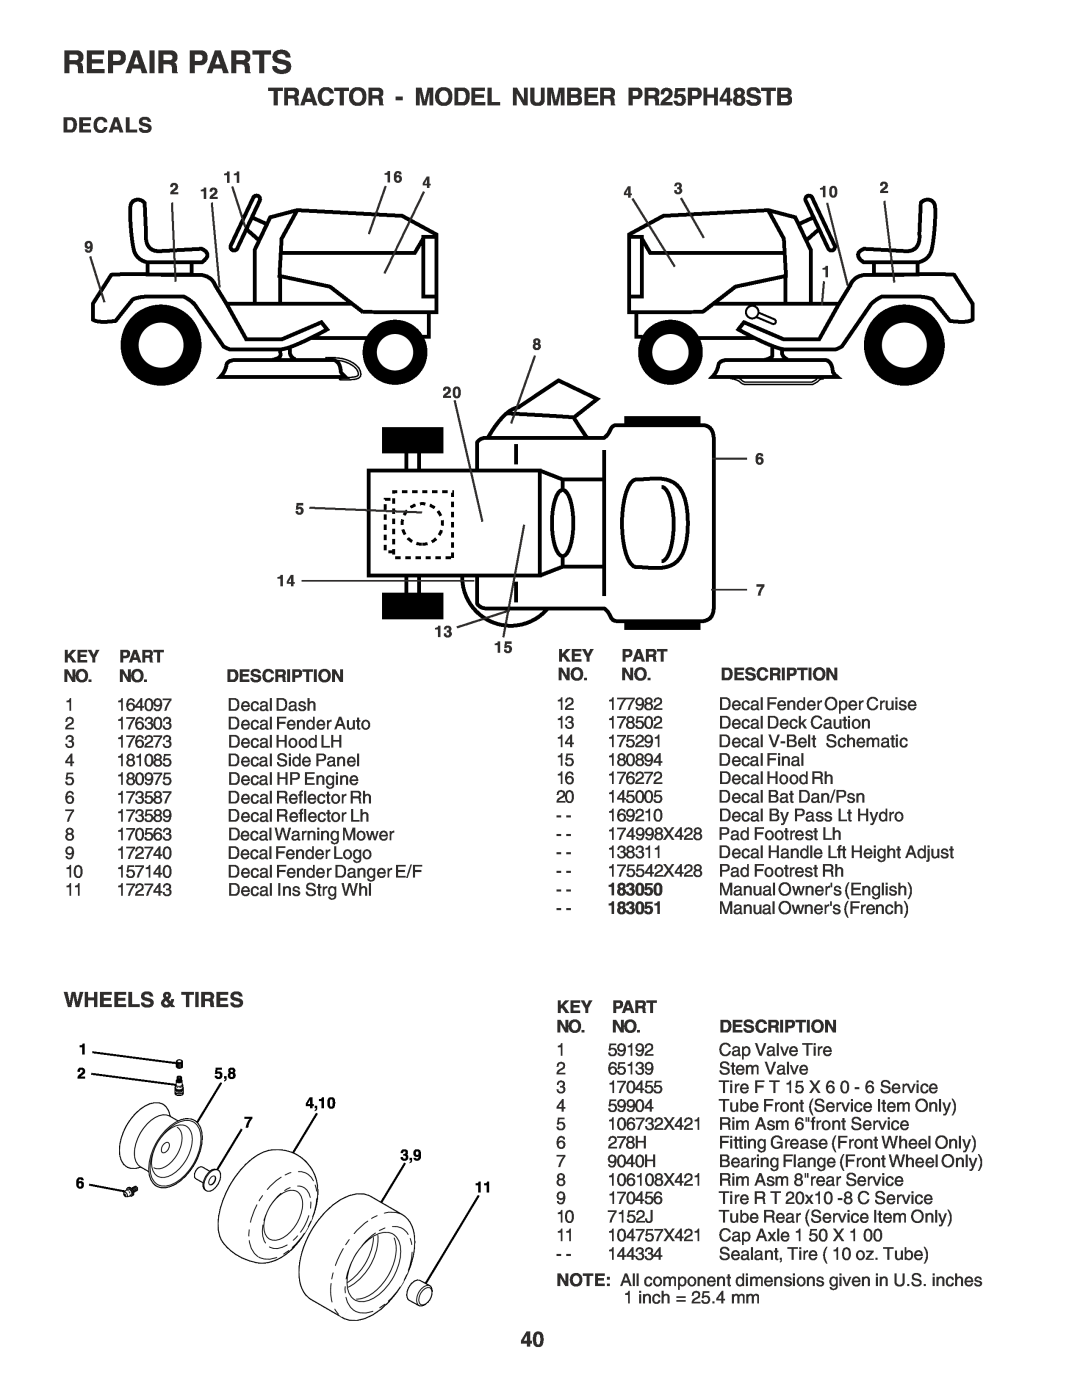 Poulan 183050 owner manual Decals, Wheels & Tires, Repair Parts, TRACTOR - MODEL NUMBER PR25PH48STB, 4,10 